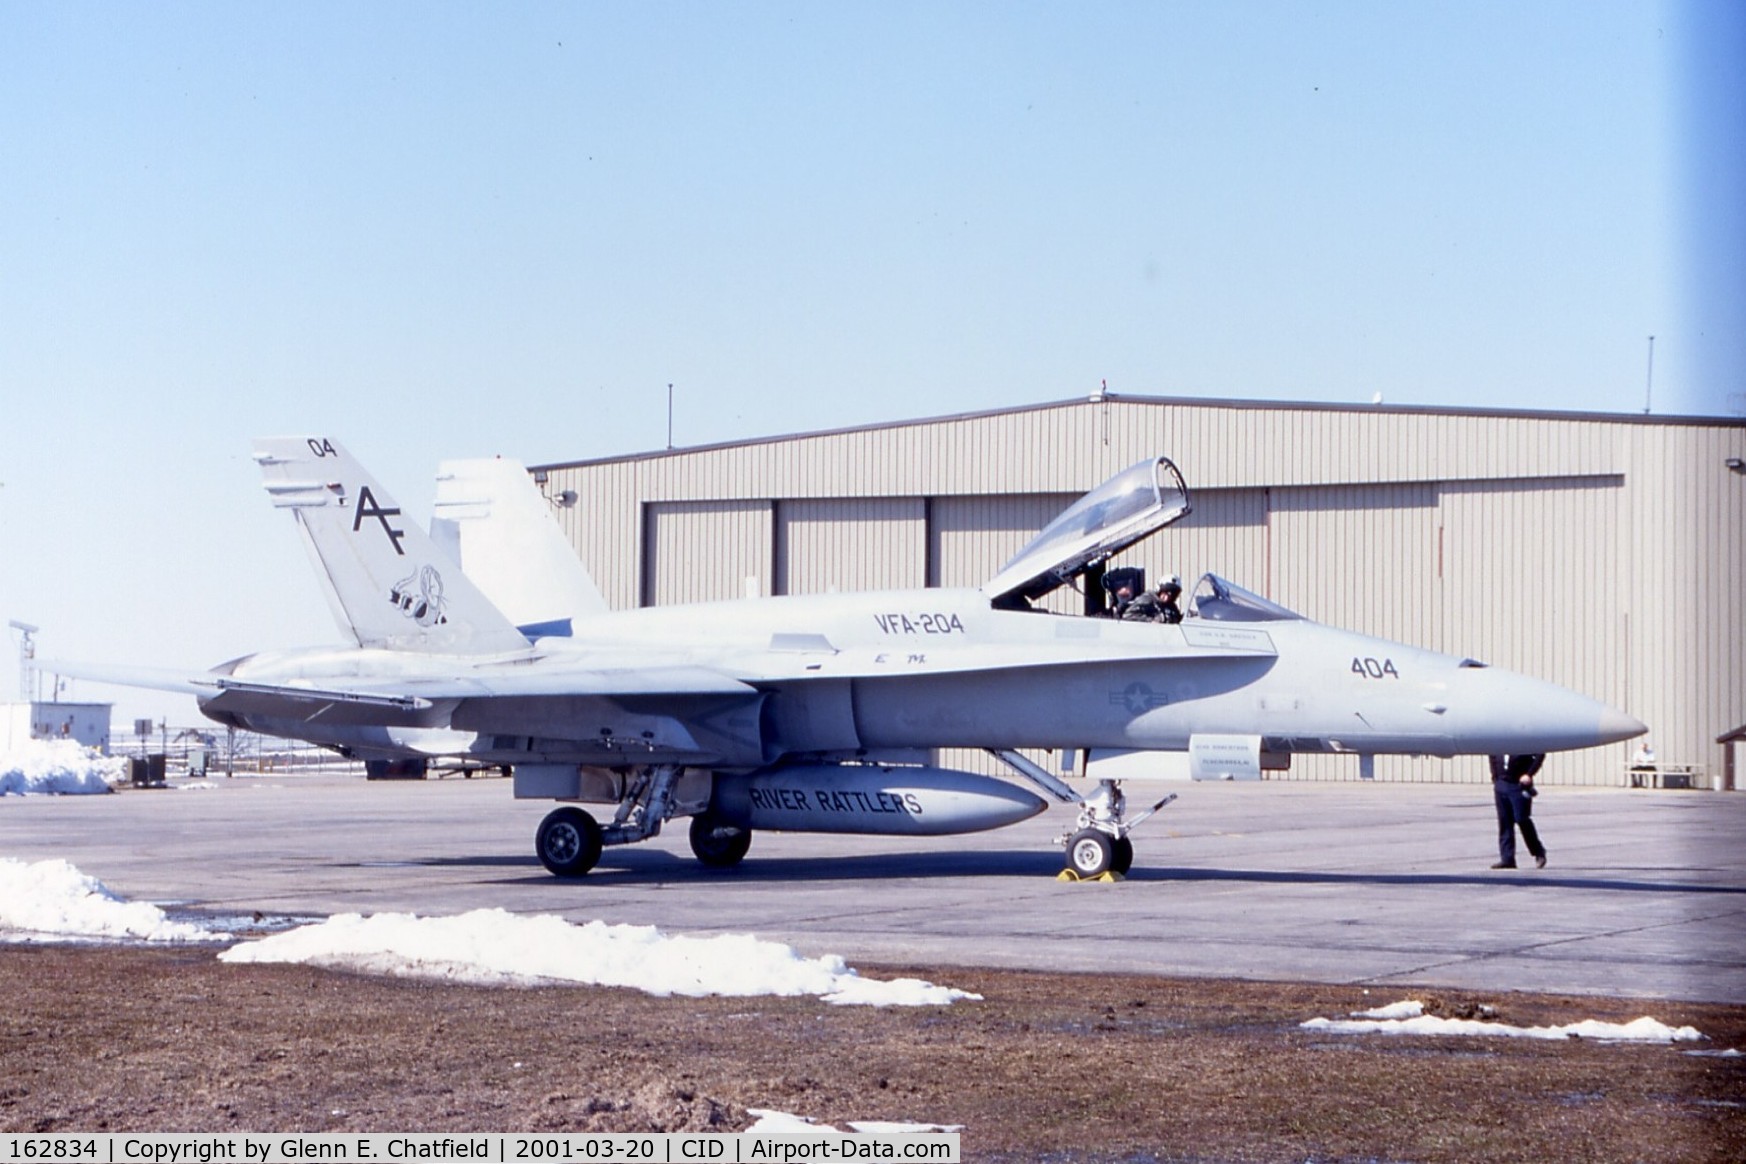 162834, McDonnell Douglas F/A-18A Hornet C/N 0351, F/A-18A at the Rockwell-Collins ramp